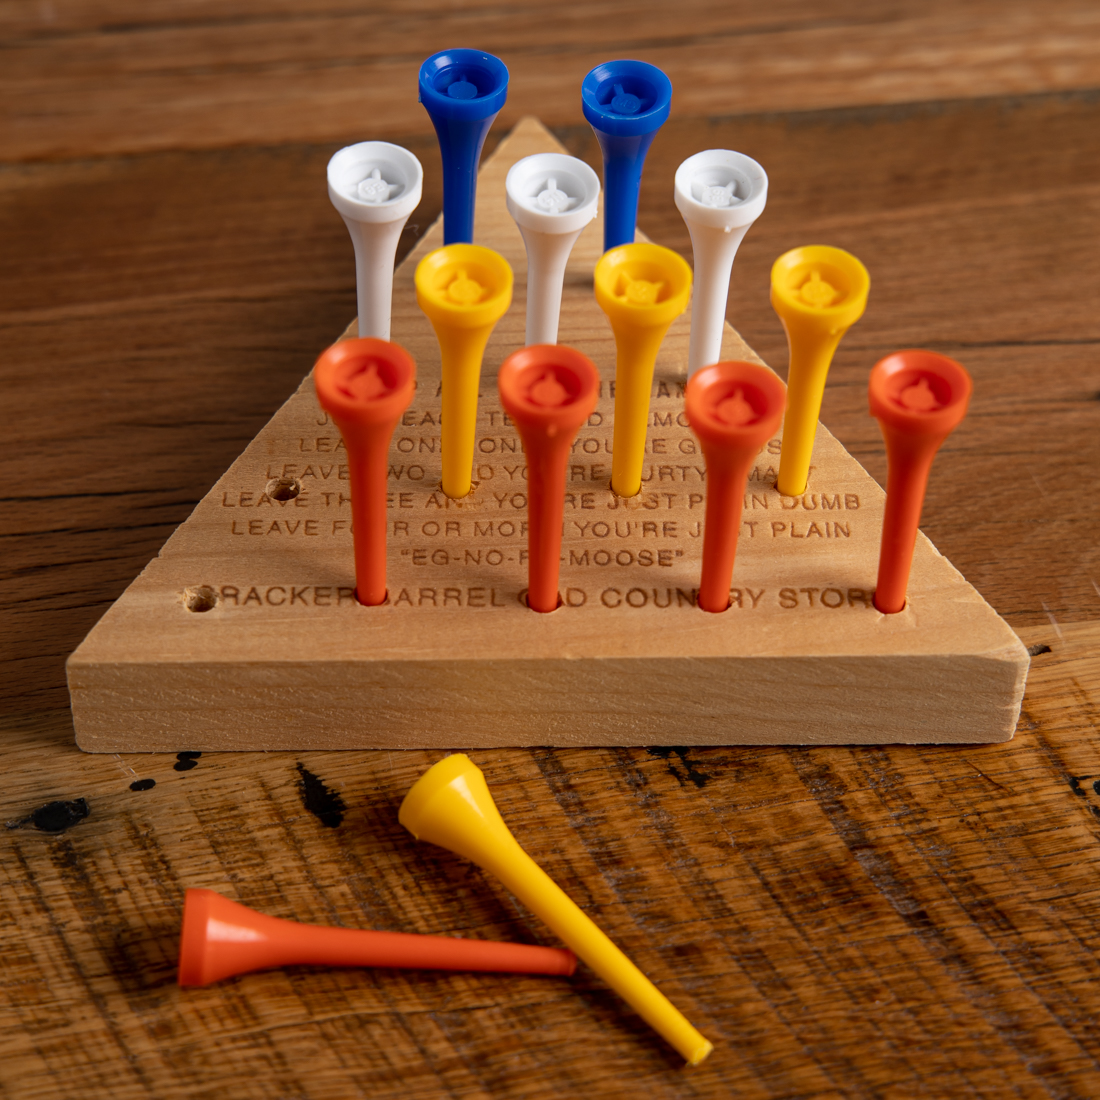 peg game for toddlers